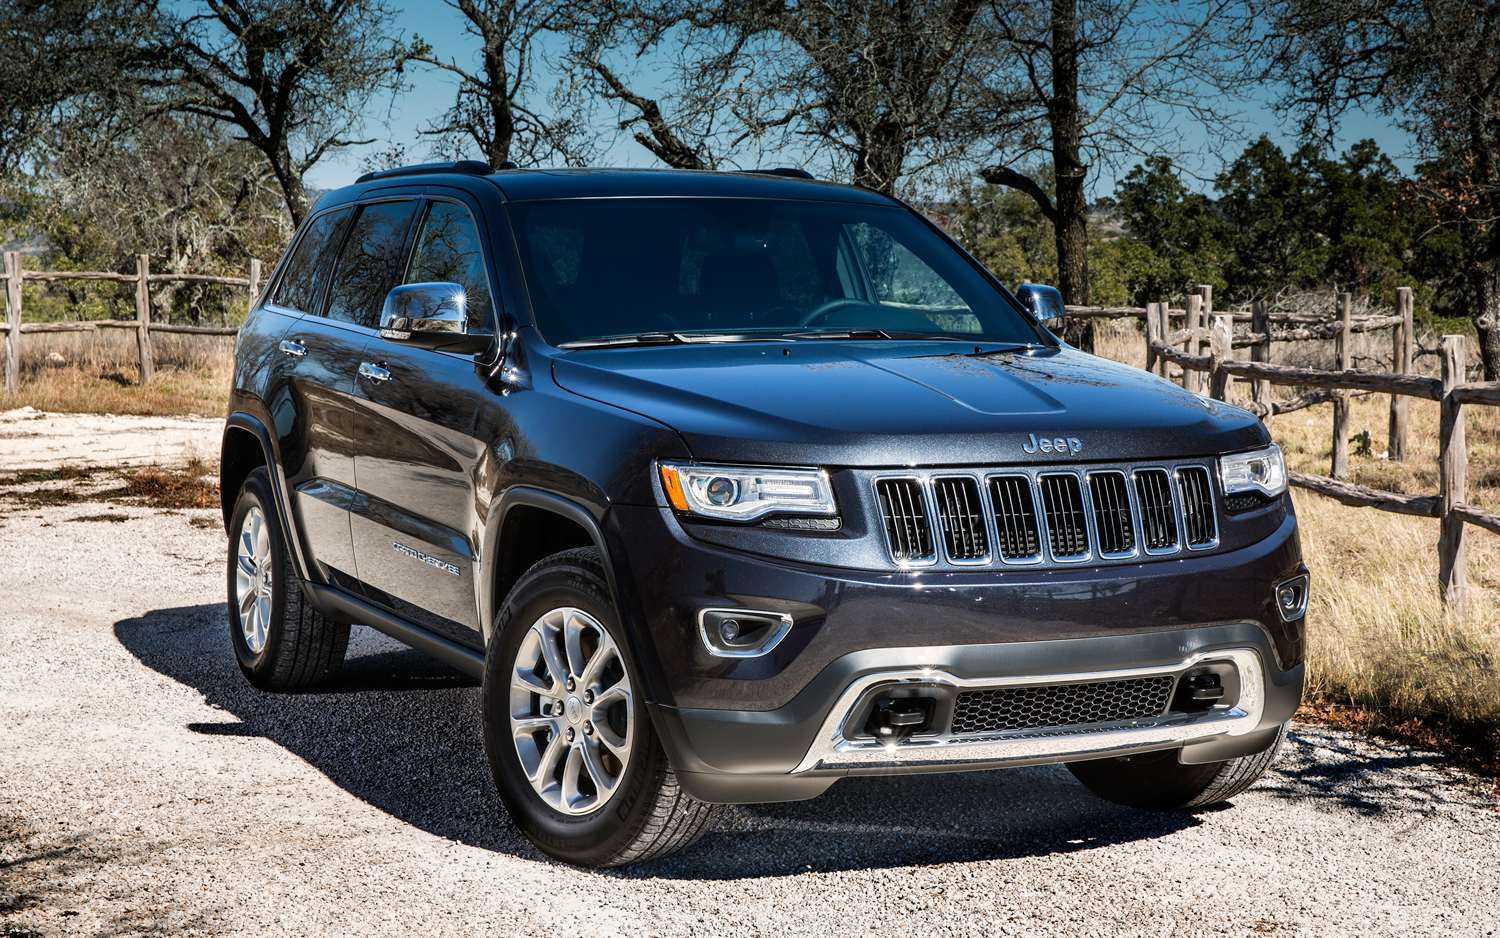 Free Download 2014 Jeep Grand Cherokee Ecodiesel Photo Gallery 1500x938 For Your Desktop Mobile Tablet Explore 46 2015 Jeep Cherokee Wallpaper Jeep Wallpapers Hd Srt8 Wallpaper Jeep Images Wallpaper